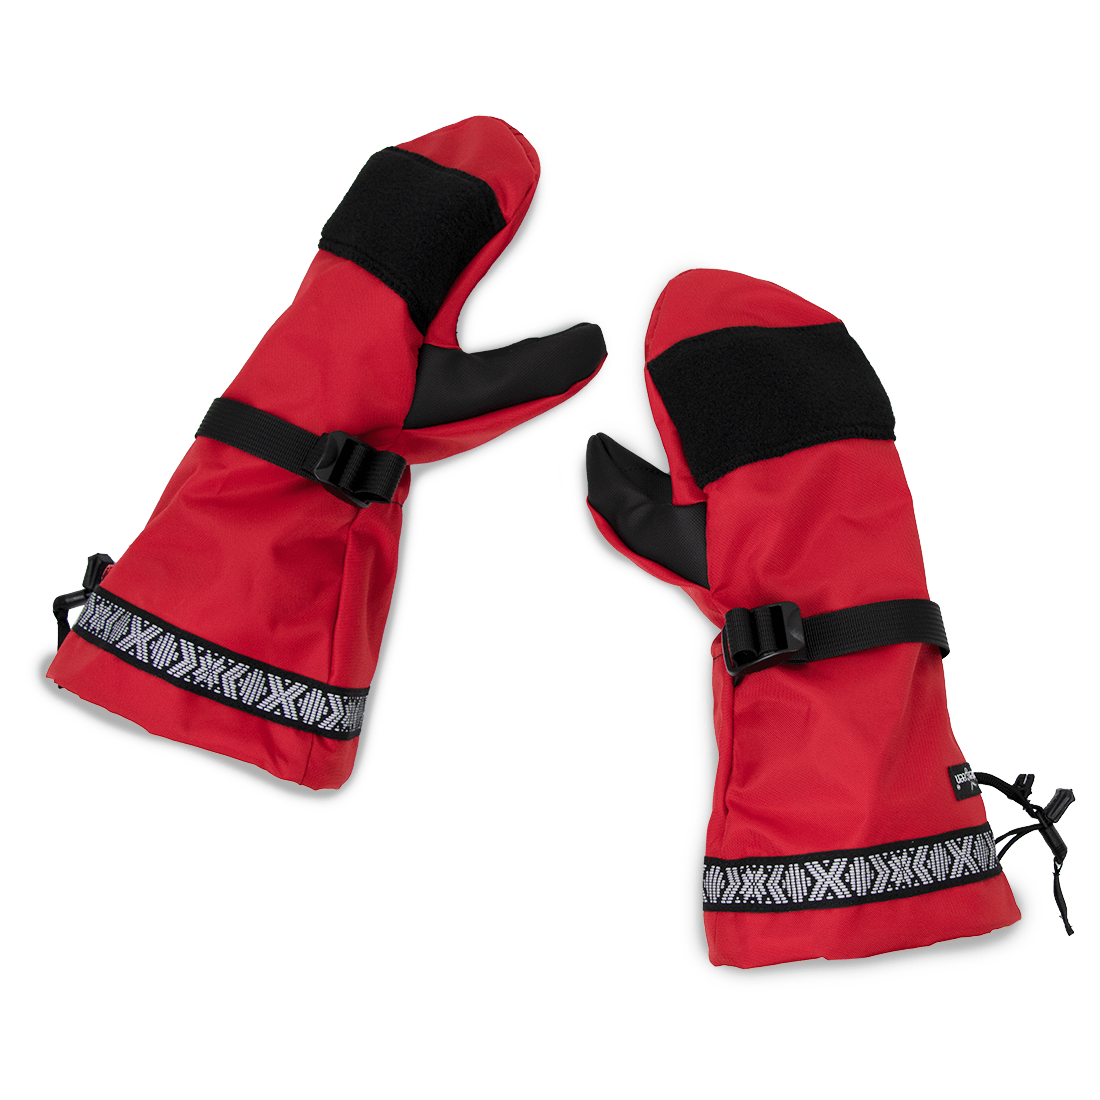 Wintergreen Shell Overmitts (Unisex)-Made in Ely, MN. X-Large / Black Shell (Black Trim)